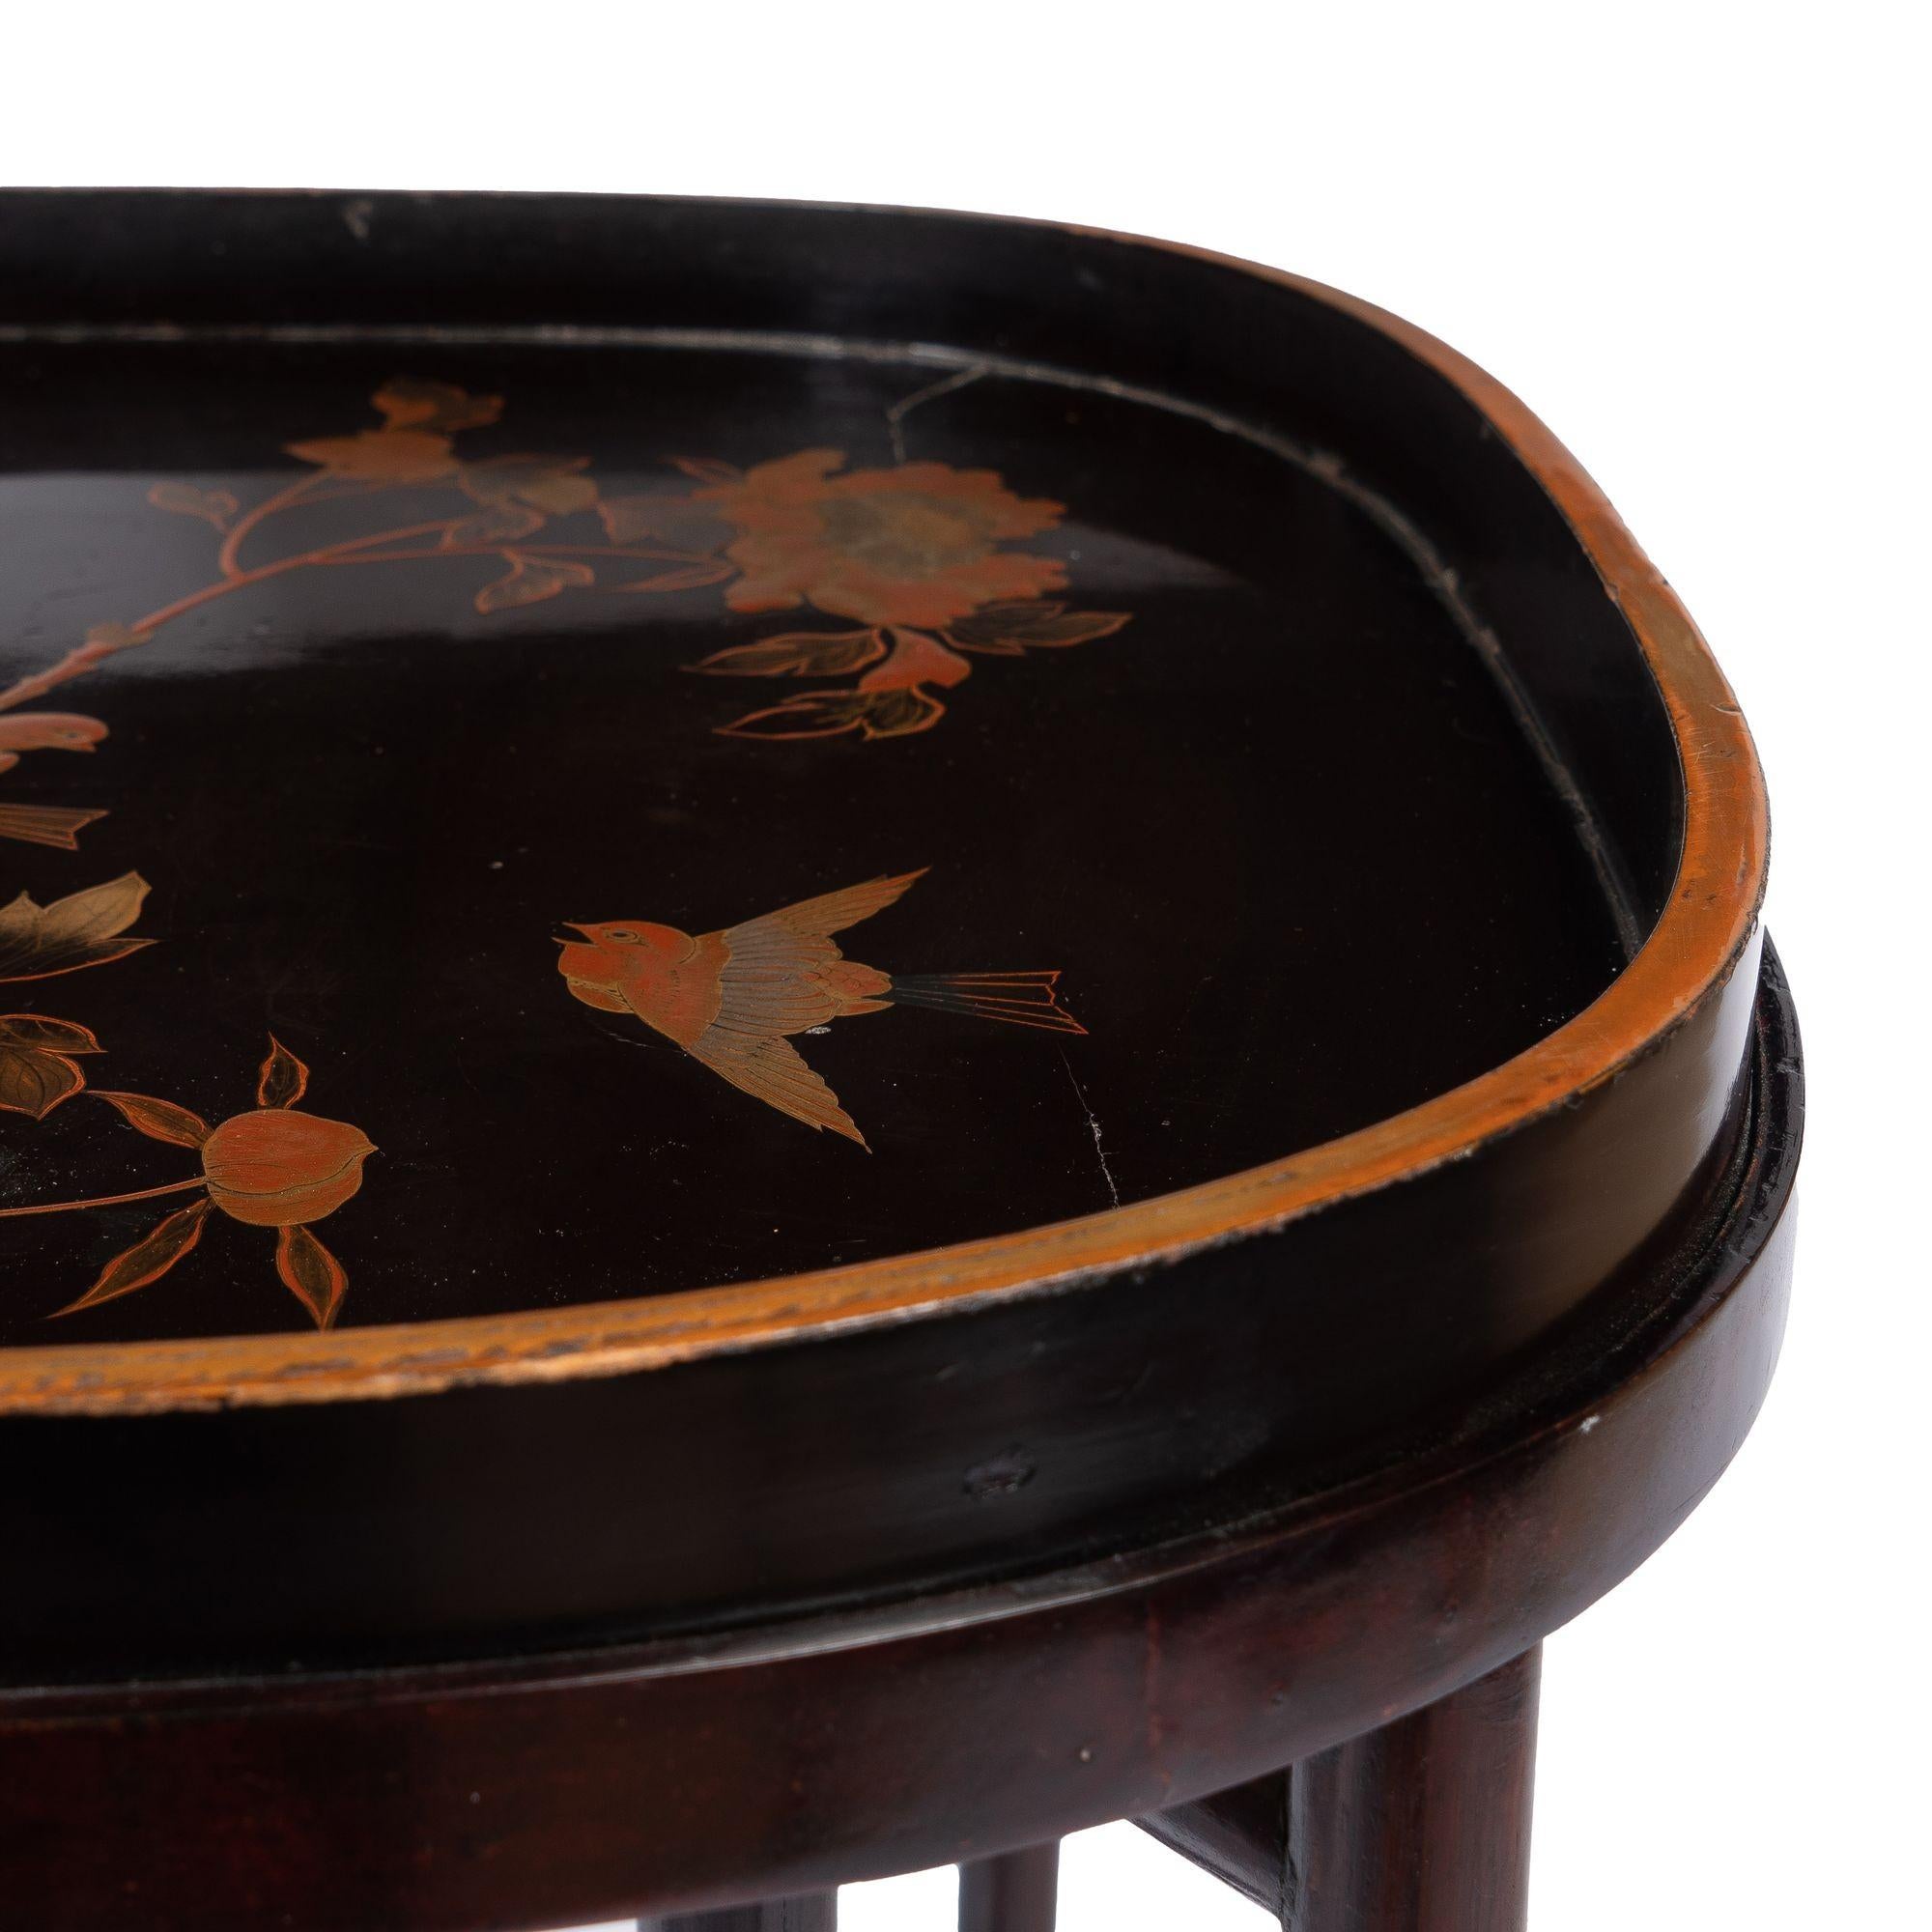 Japanese Maki-E Lacquered Oval Wood Tray on Stand, c. 1850-1900 For Sale 7